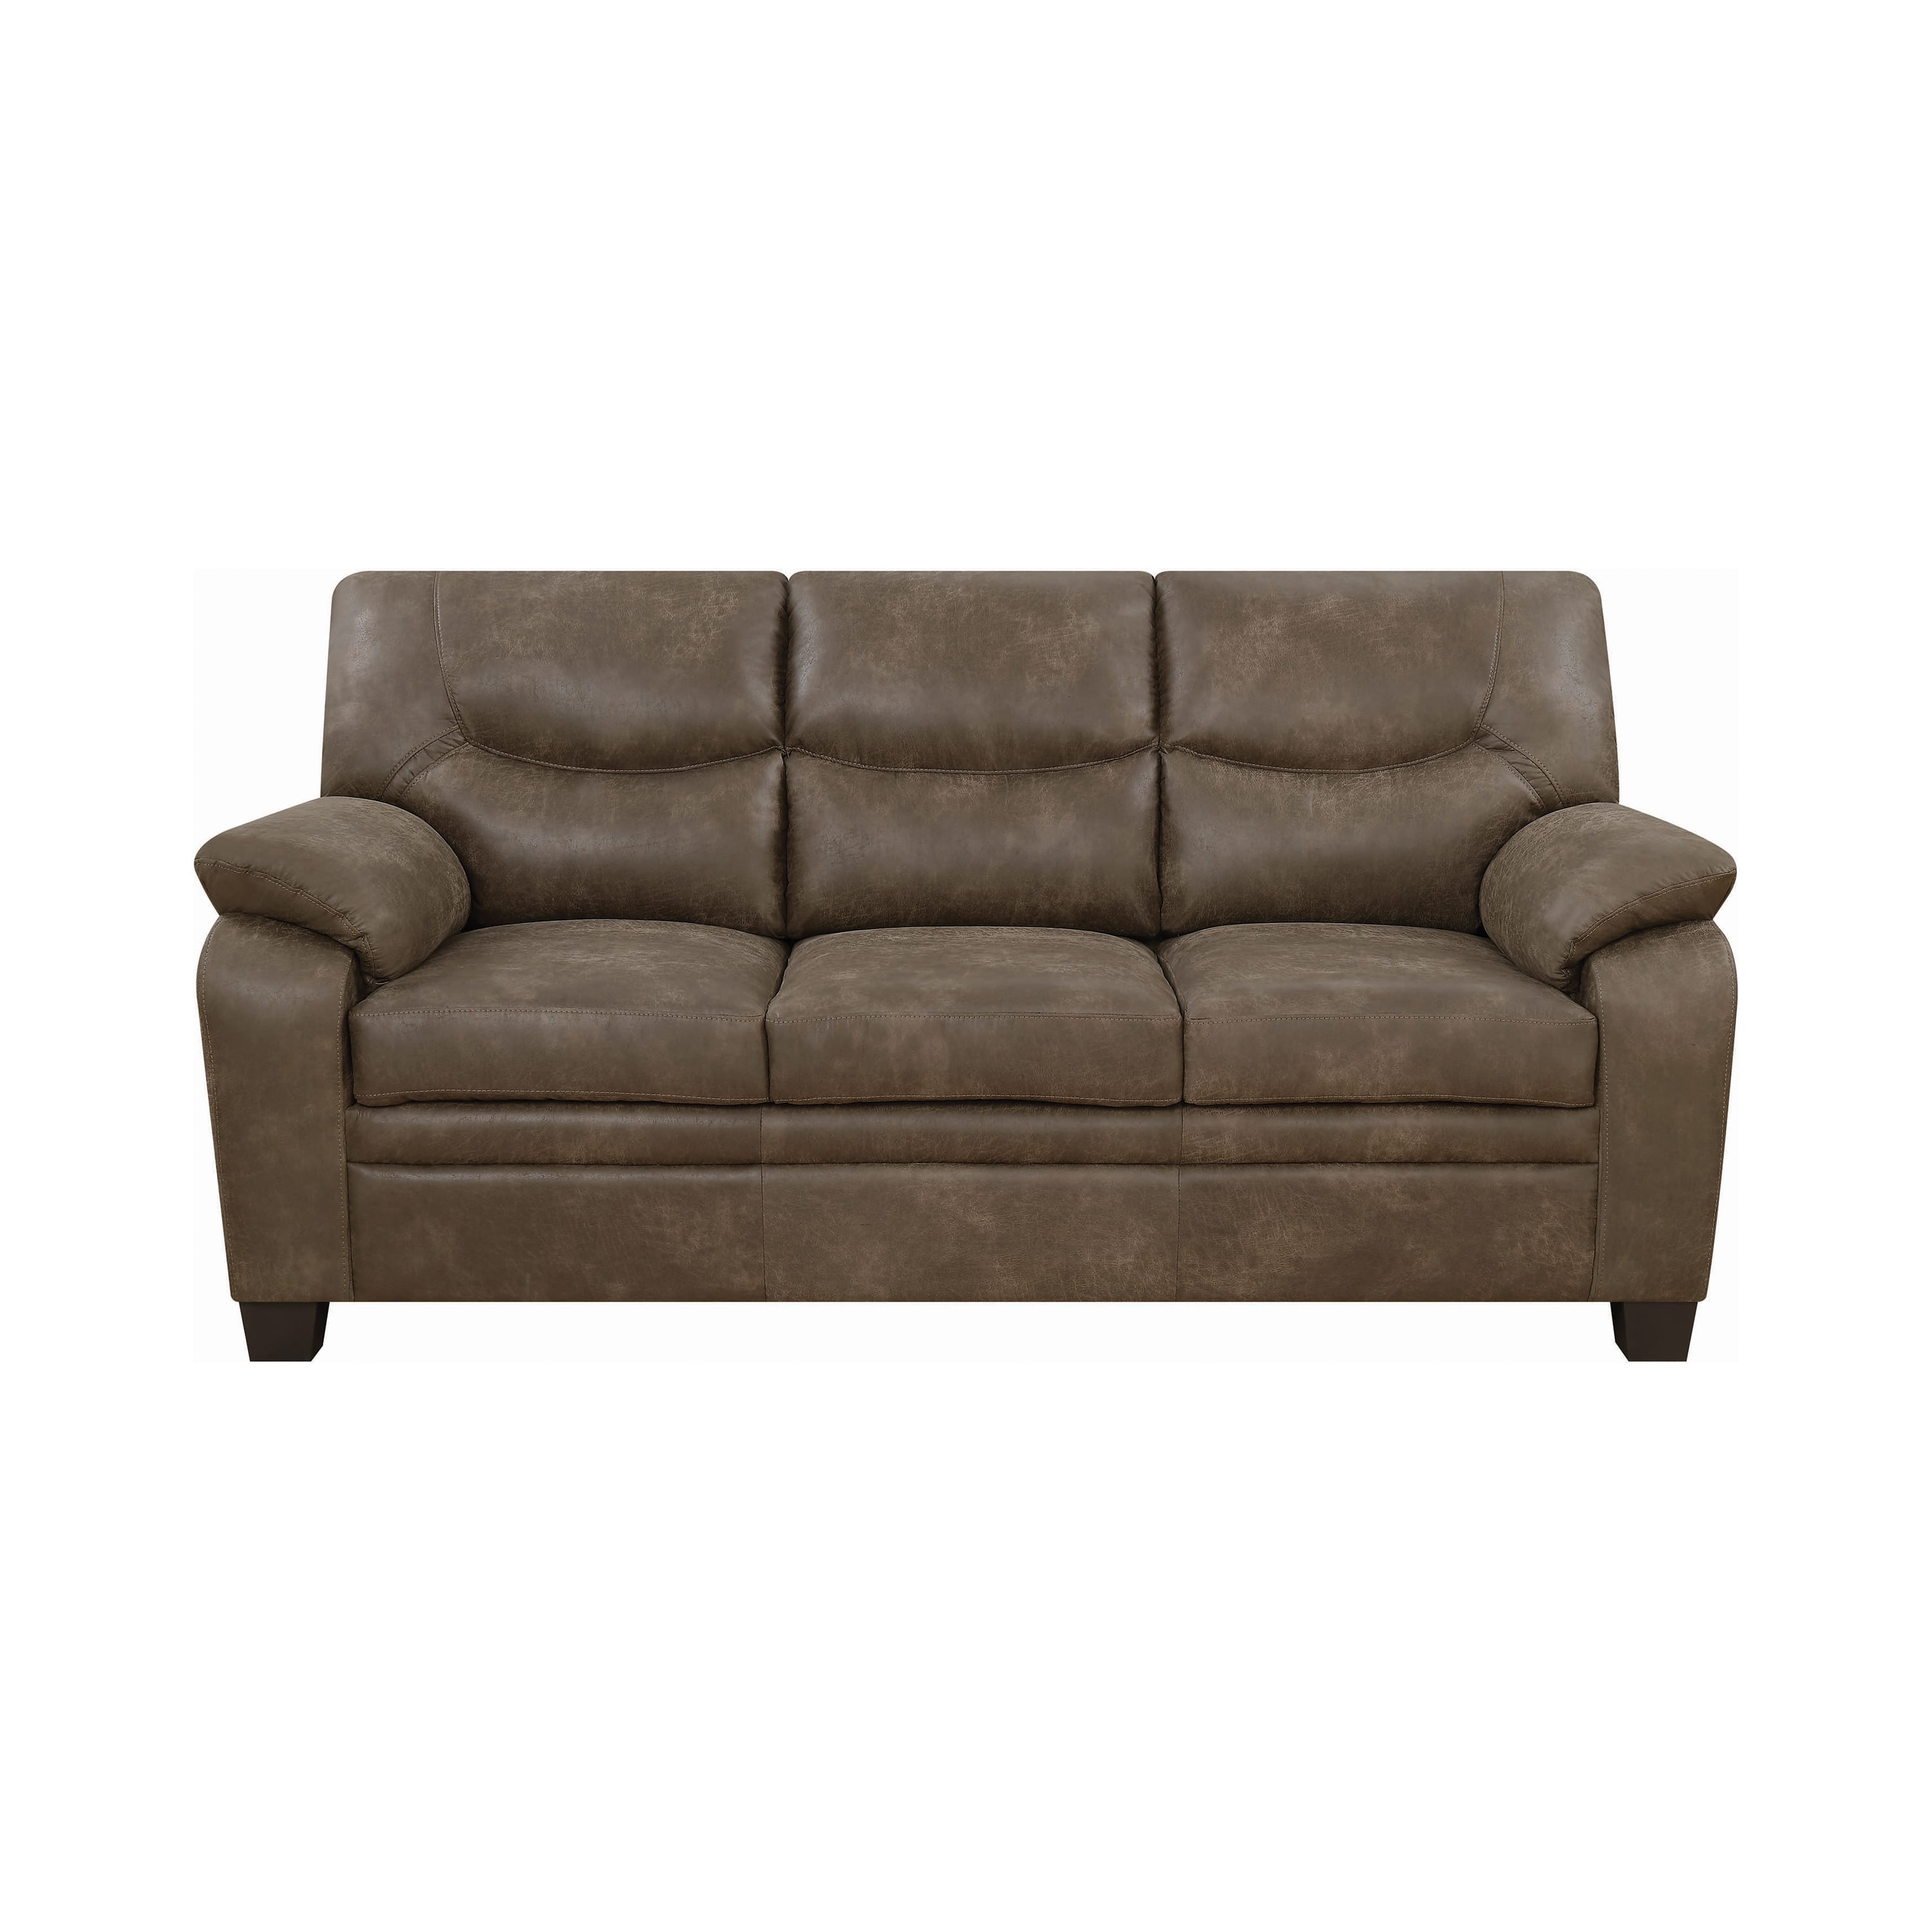 Meagan Brown Upholstered Sofa w/Pillow Top Arms by Coaster Fine Furniture